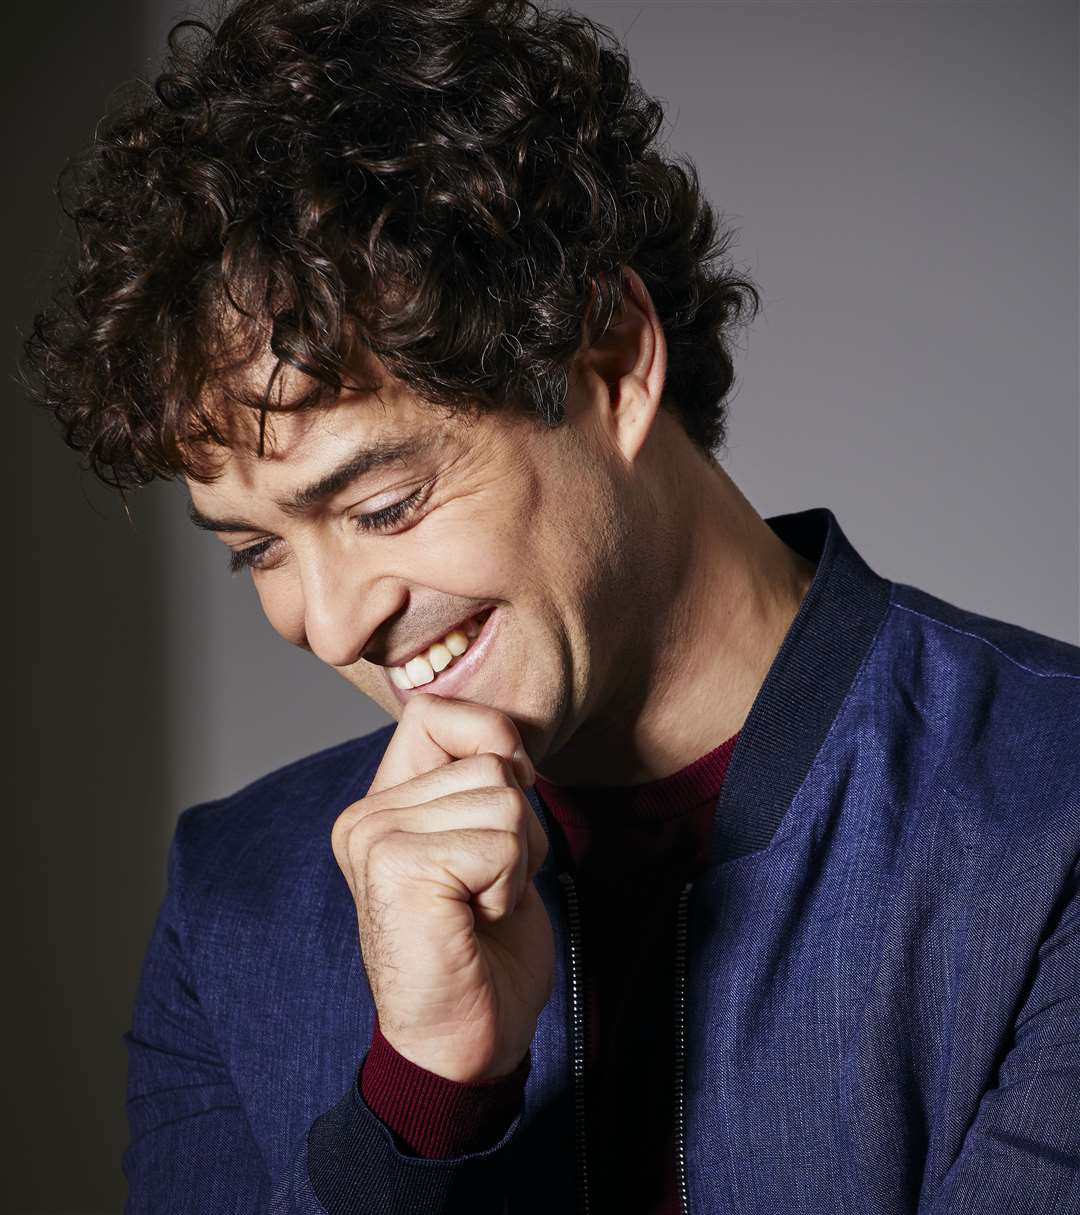 Lee Mead won the role of Joseph at the start of his career